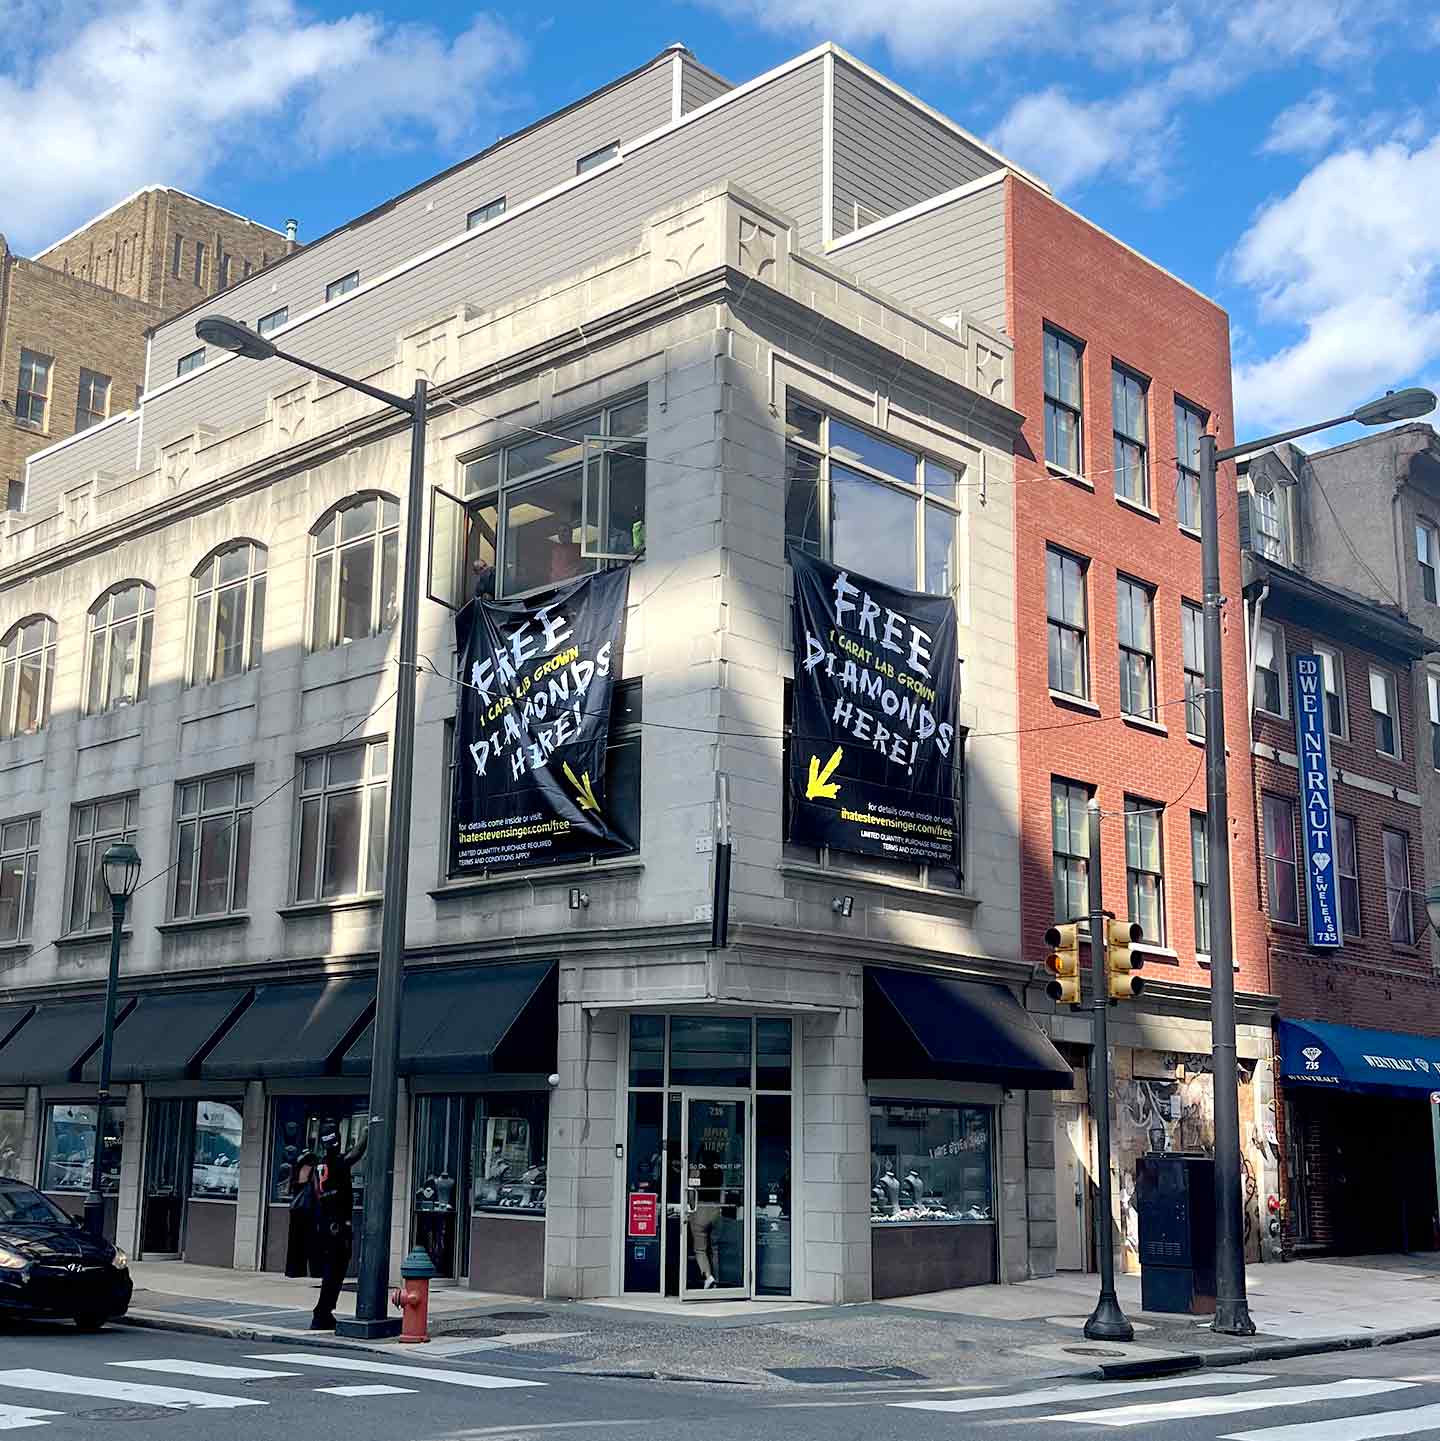 Picture of Steven Singer flagship store with promotional banners. Links to learn more about free lab grown diamond promotion.